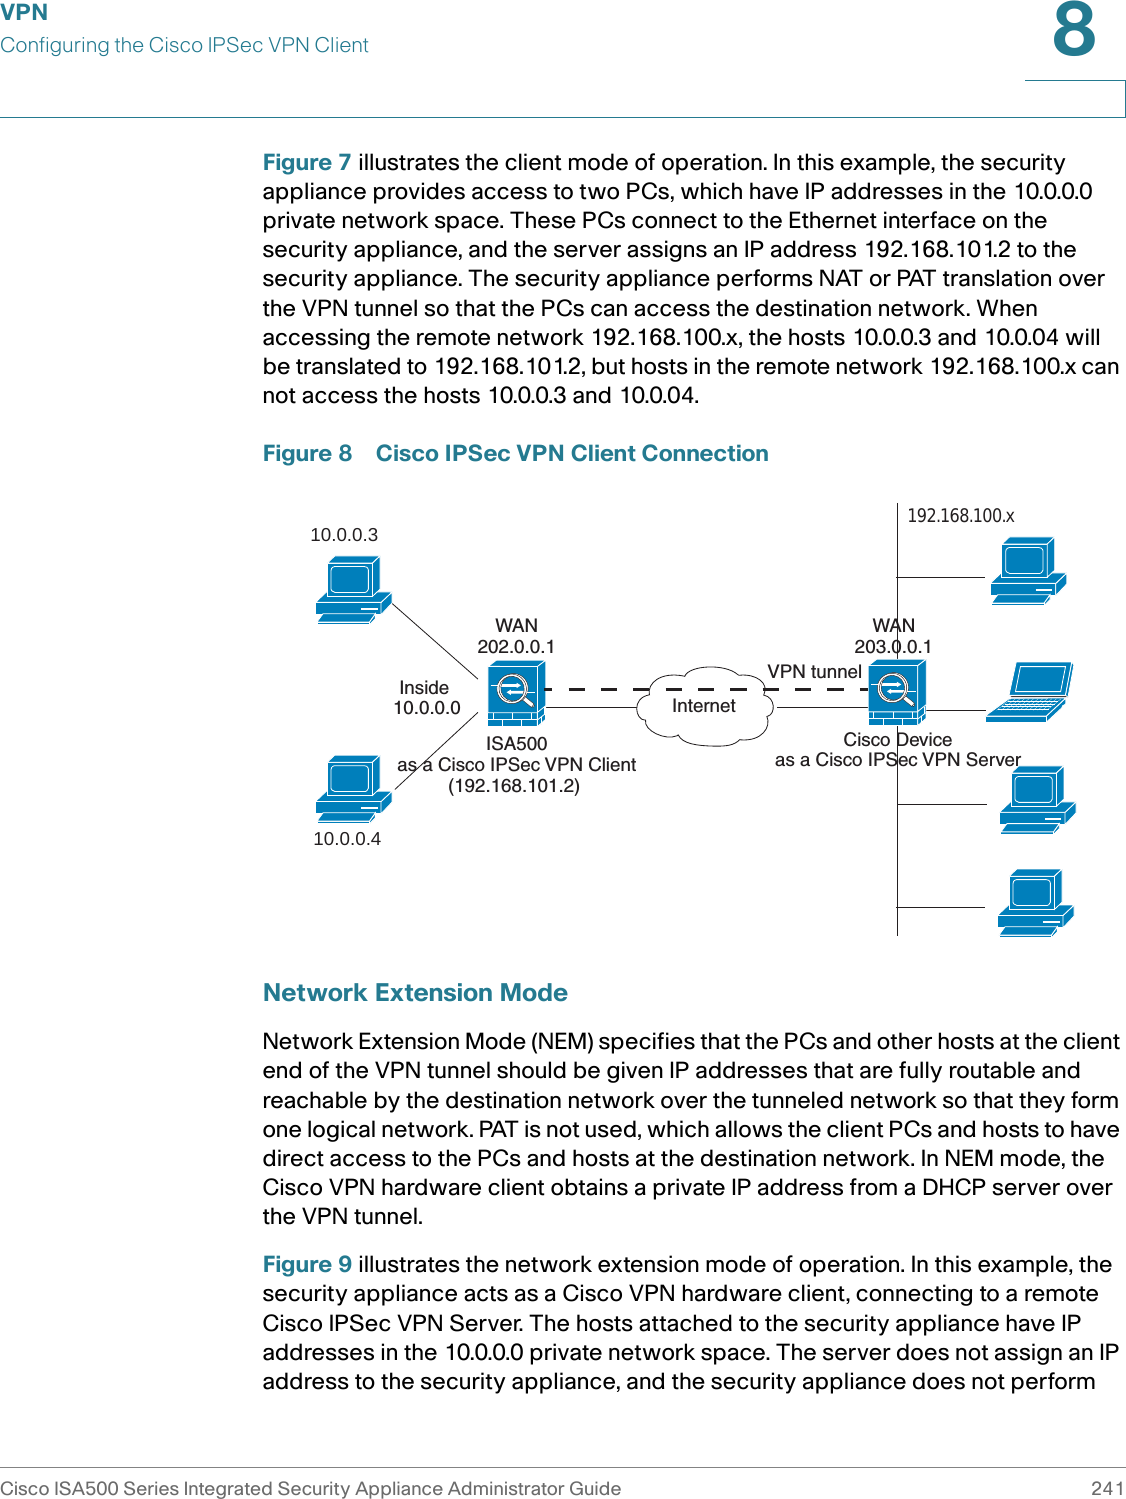 VPNConfiguring the Cisco IPSec VPN ClientCisco ISA500 Series Integrated Security Appliance Administrator Guide 2418 Figure 7 illustrates the client mode of operation. In this example, the security appliance provides access to two PCs, which have IP addresses in the 10.0.0.0 private network space. These PCs connect to the Ethernet interface on the security appliance, and the server assigns an IP address 192.168.101.2 to the security appliance. The security appliance performs NAT or PAT translation over the VPN tunnel so that the PCs can access the destination network. When accessing the remote network 192.168.100.x, the hosts 10.0.0.3 and 10.0.04 will be translated to 192.168.101.2, but hosts in the remote network 192.168.100.x can not access the hosts 10.0.0.3 and 10.0.04. Figure 8 Cisco IPSec VPN Client ConnectionNetwork Extension ModeNetwork Extension Mode (NEM) specifies that the PCs and other hosts at the client end of the VPN tunnel should be given IP addresses that are fully routable and reachable by the destination network over the tunneled network so that they form one logical network. PAT is not used, which allows the client PCs and hosts to have direct access to the PCs and hosts at the destination network. In NEM mode, the Cisco VPN hardware client obtains a private IP address from a DHCP server over the VPN tunnel. Figure 9 illustrates the network extension mode of operation. In this example, the security appliance acts as a Cisco VPN hardware client, connecting to a remote Cisco IPSec VPN Server. The hosts attached to the security appliance have IP addresses in the 10.0.0.0 private network space. The server does not assign an IP address to the security appliance, and the security appliance does not perform ISA500as a Cisco IPSec VPN Client(192.168.101.2) 10.0.0.310.0.0.4InternetCisco Deviceas a Cisco IPSec VPN Server192.168.100.x VPN tunnelInside 10.0.0.0WAN202.0.0.1WAN203.0.0.1